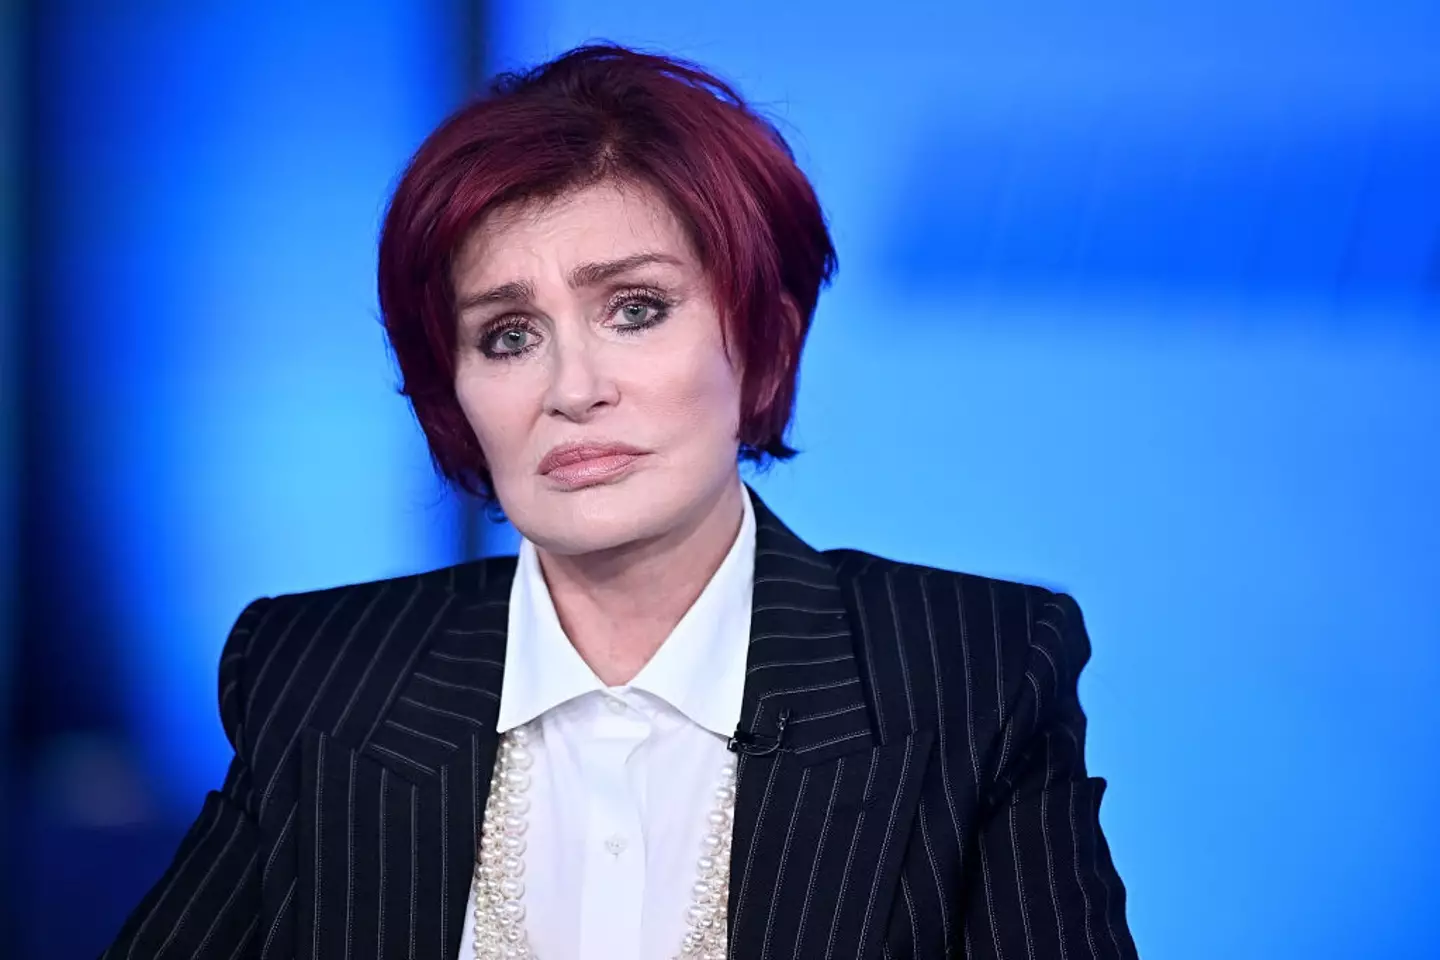 While housemates like rumoured contestant Sharon Osbourne won't receive a prize for winning, they will pocket a pretty penny just for appearing on the show.